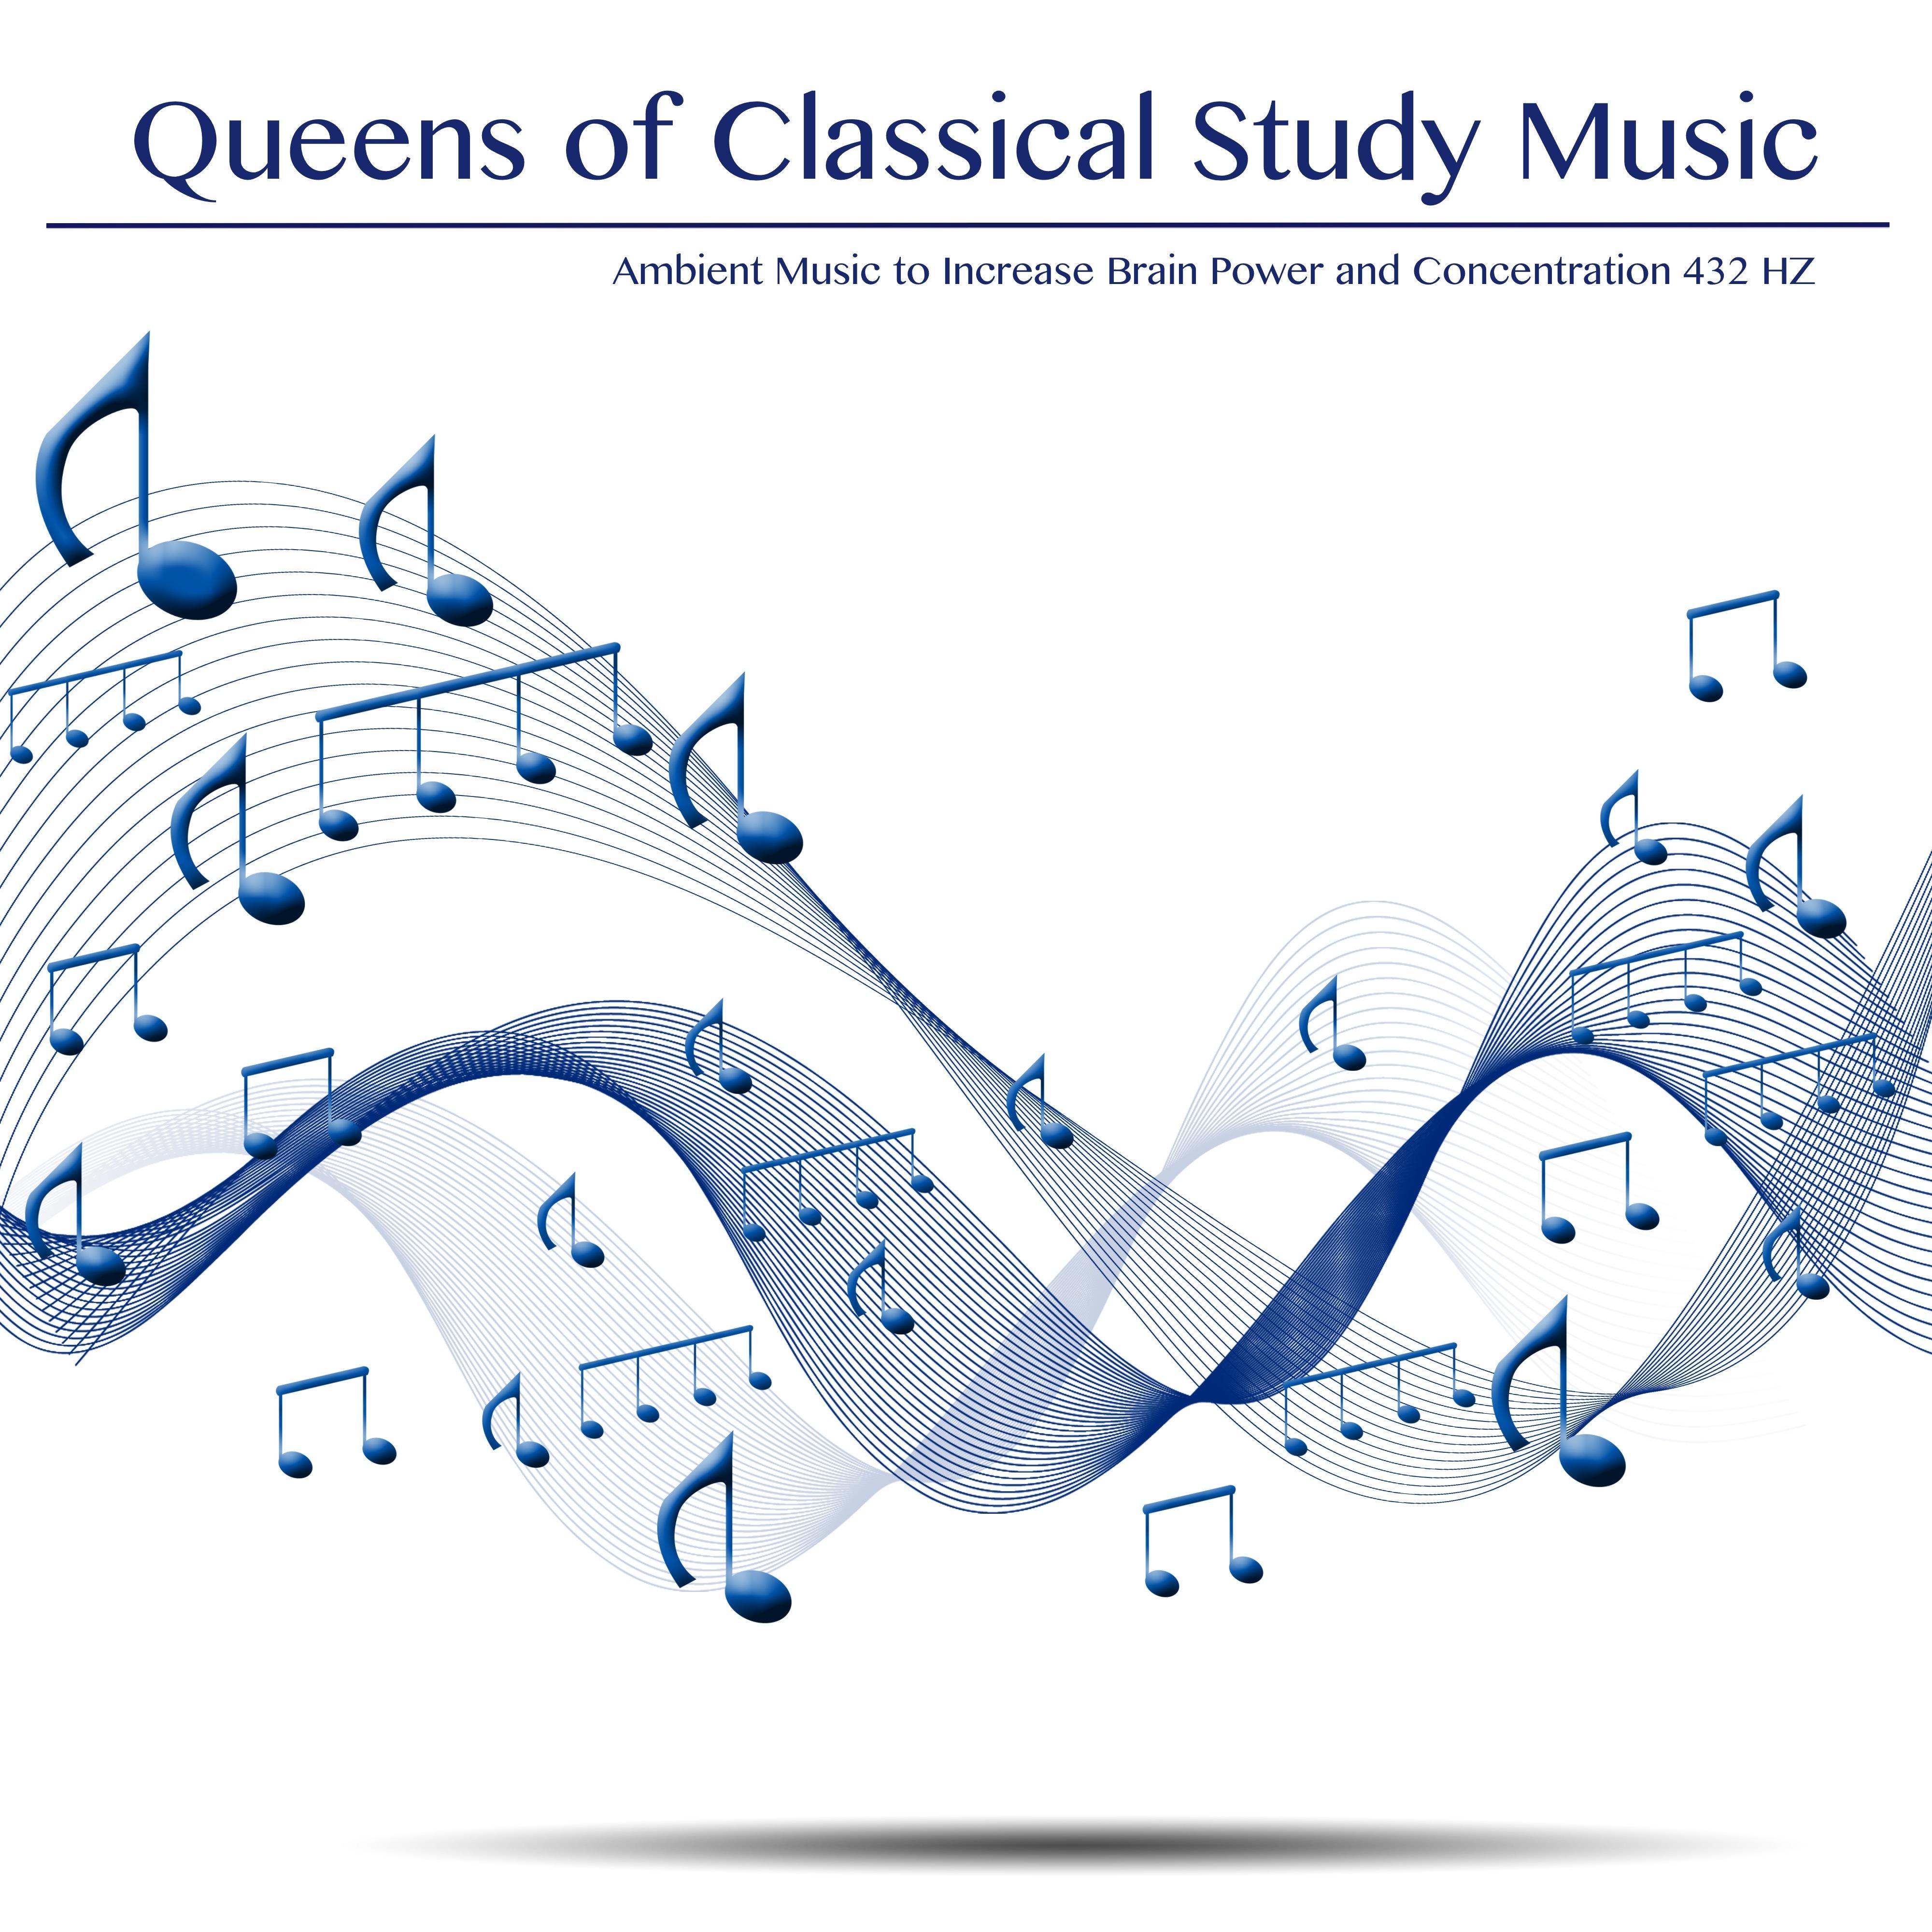 Queens of Classical Study Music - Ambient Music to Increase Brain Power and Concentration 432 HZ